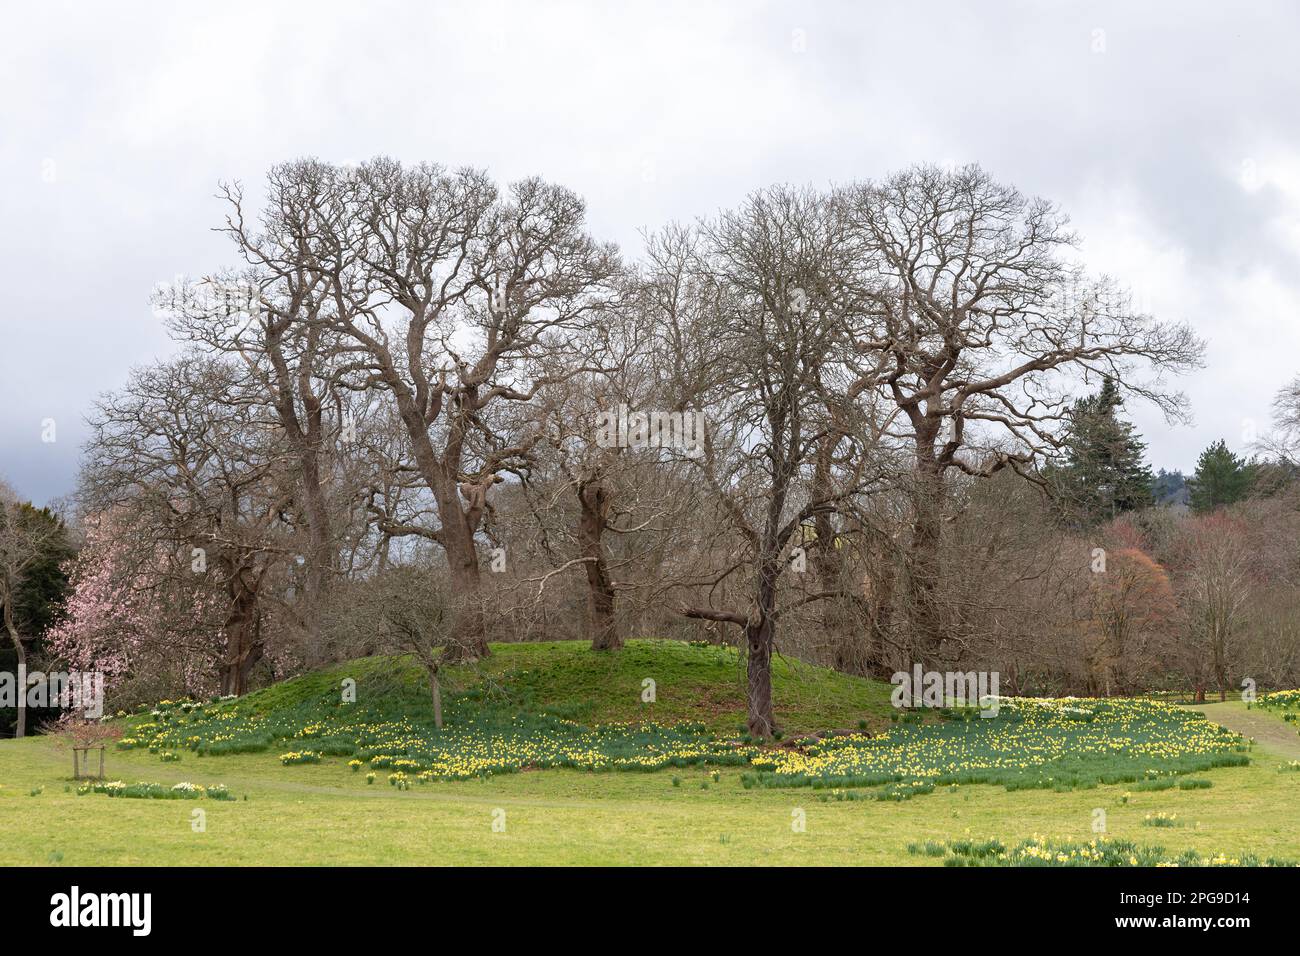 Daffodil flowers in spring with a copse of trees Stock Photo